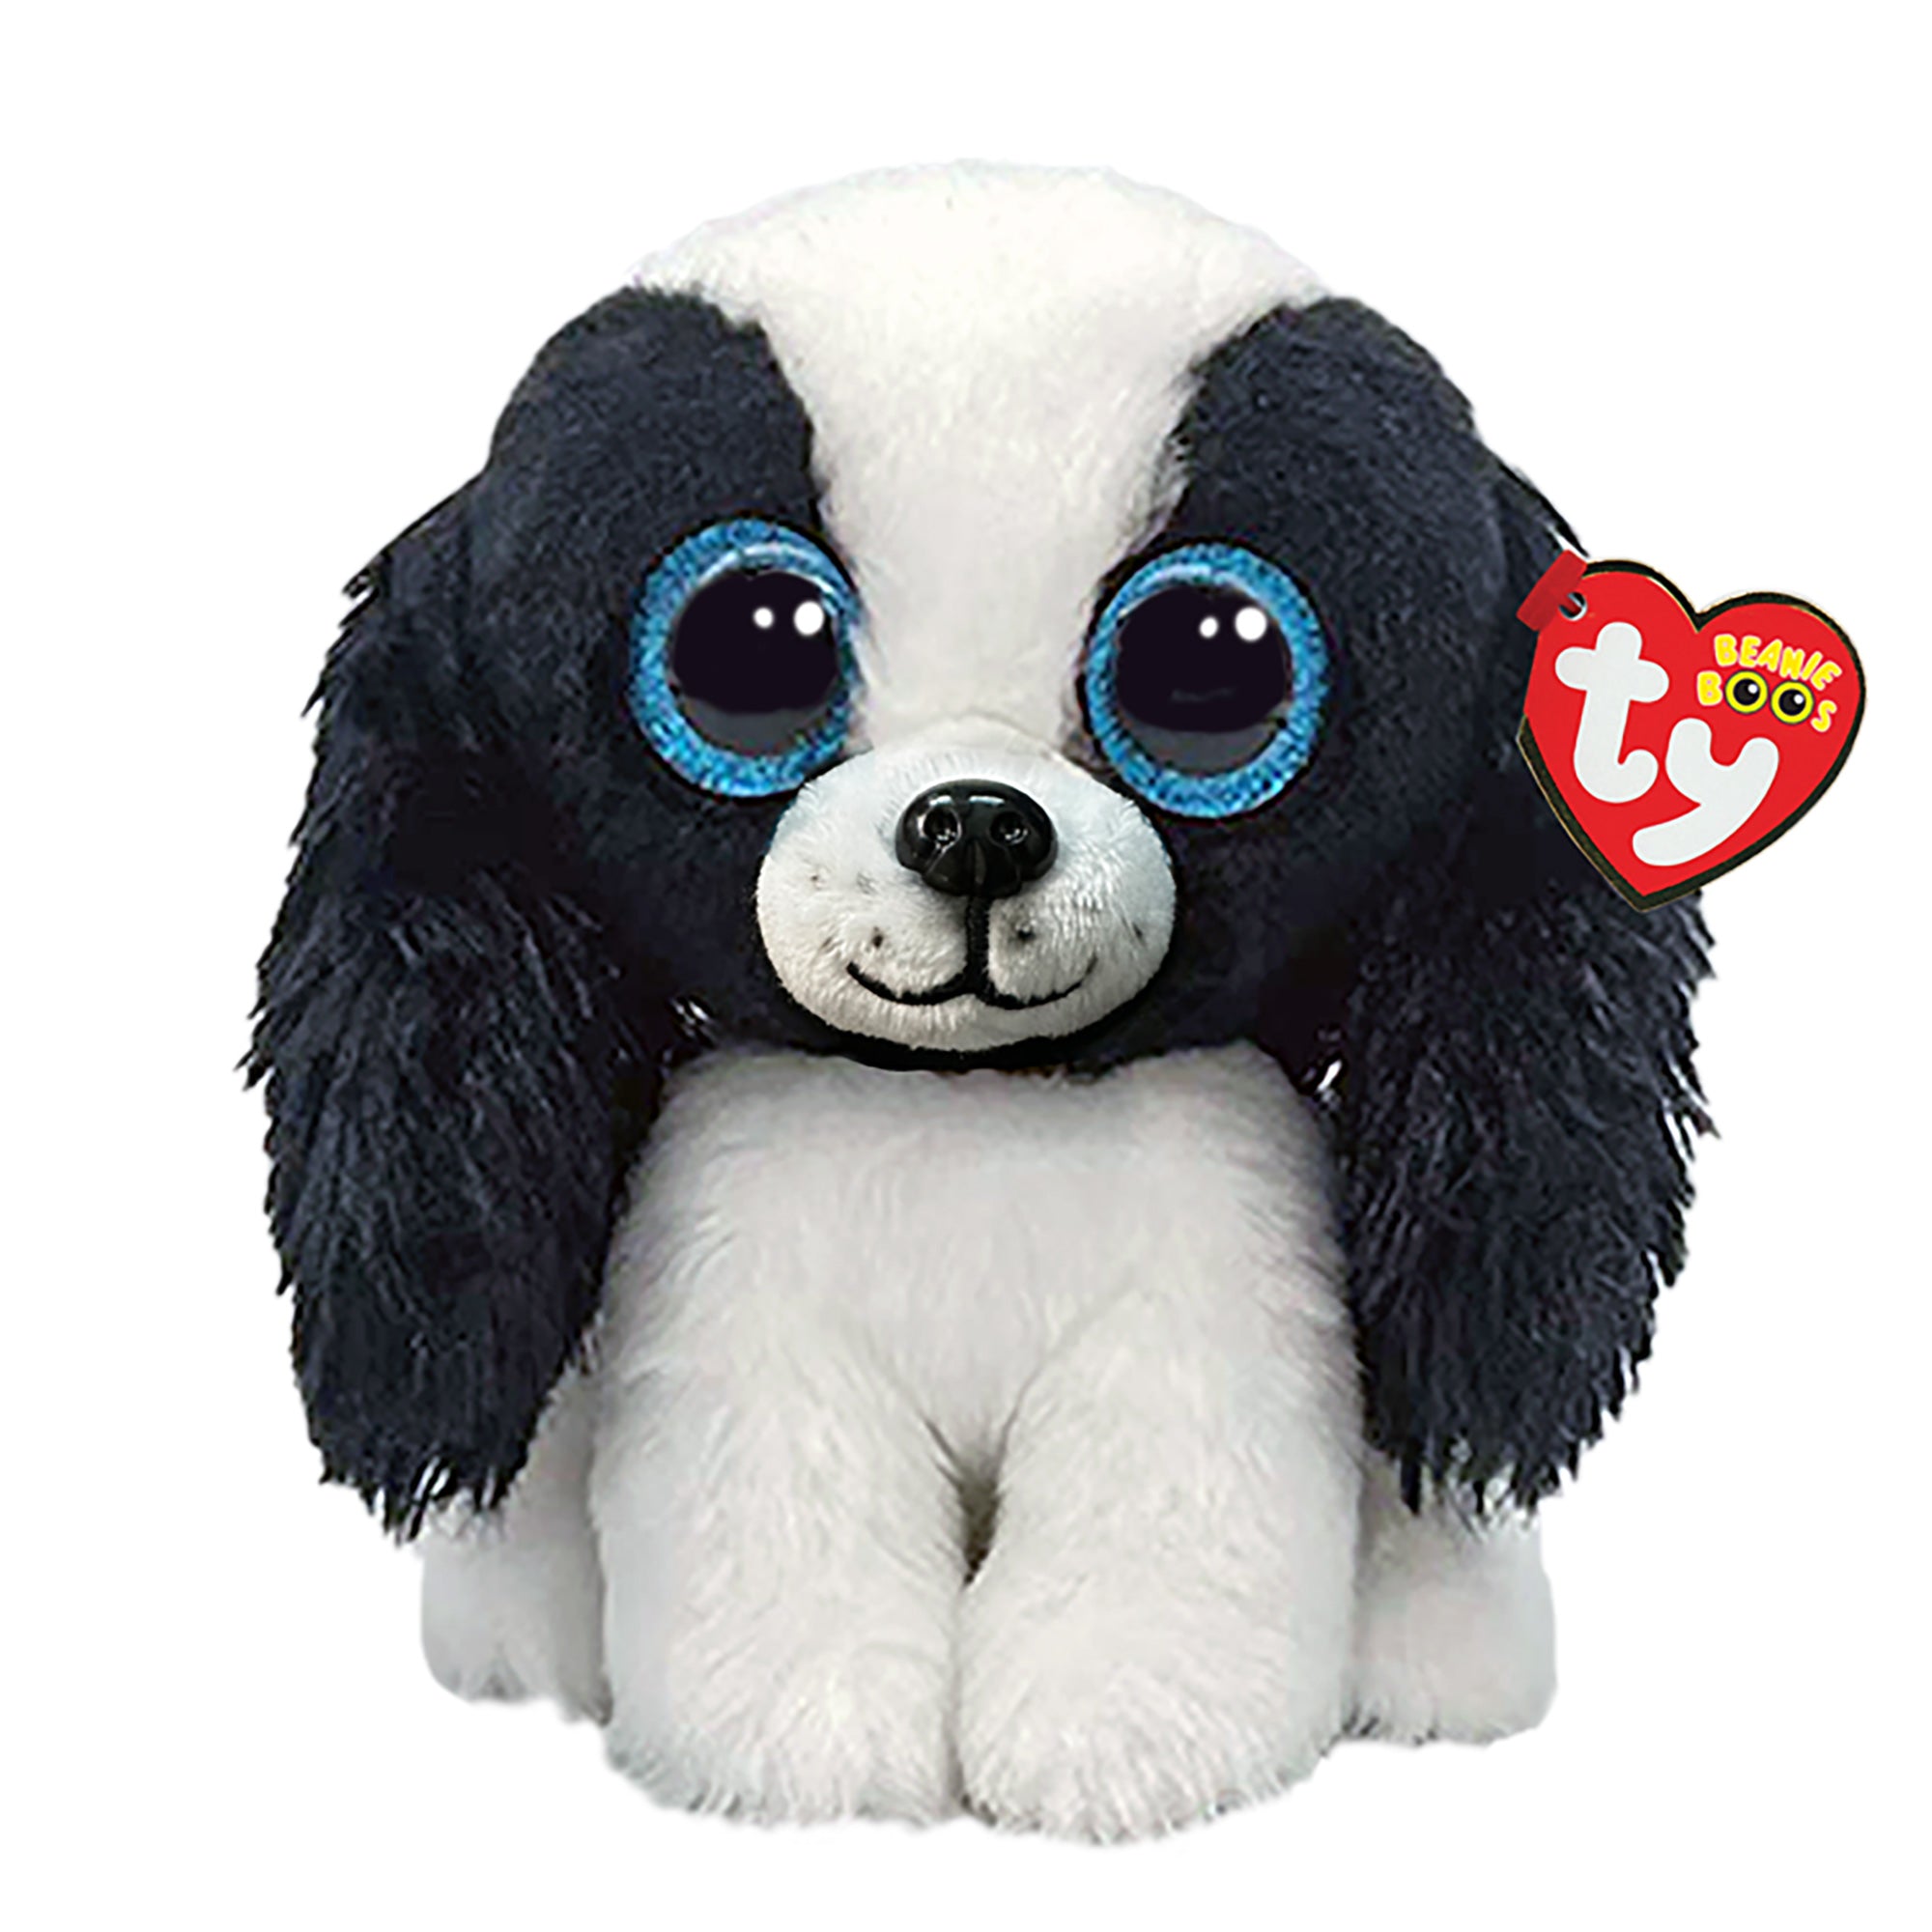 TY Beanie Boo Plush, Sissy, 6 Inches, 1 Count